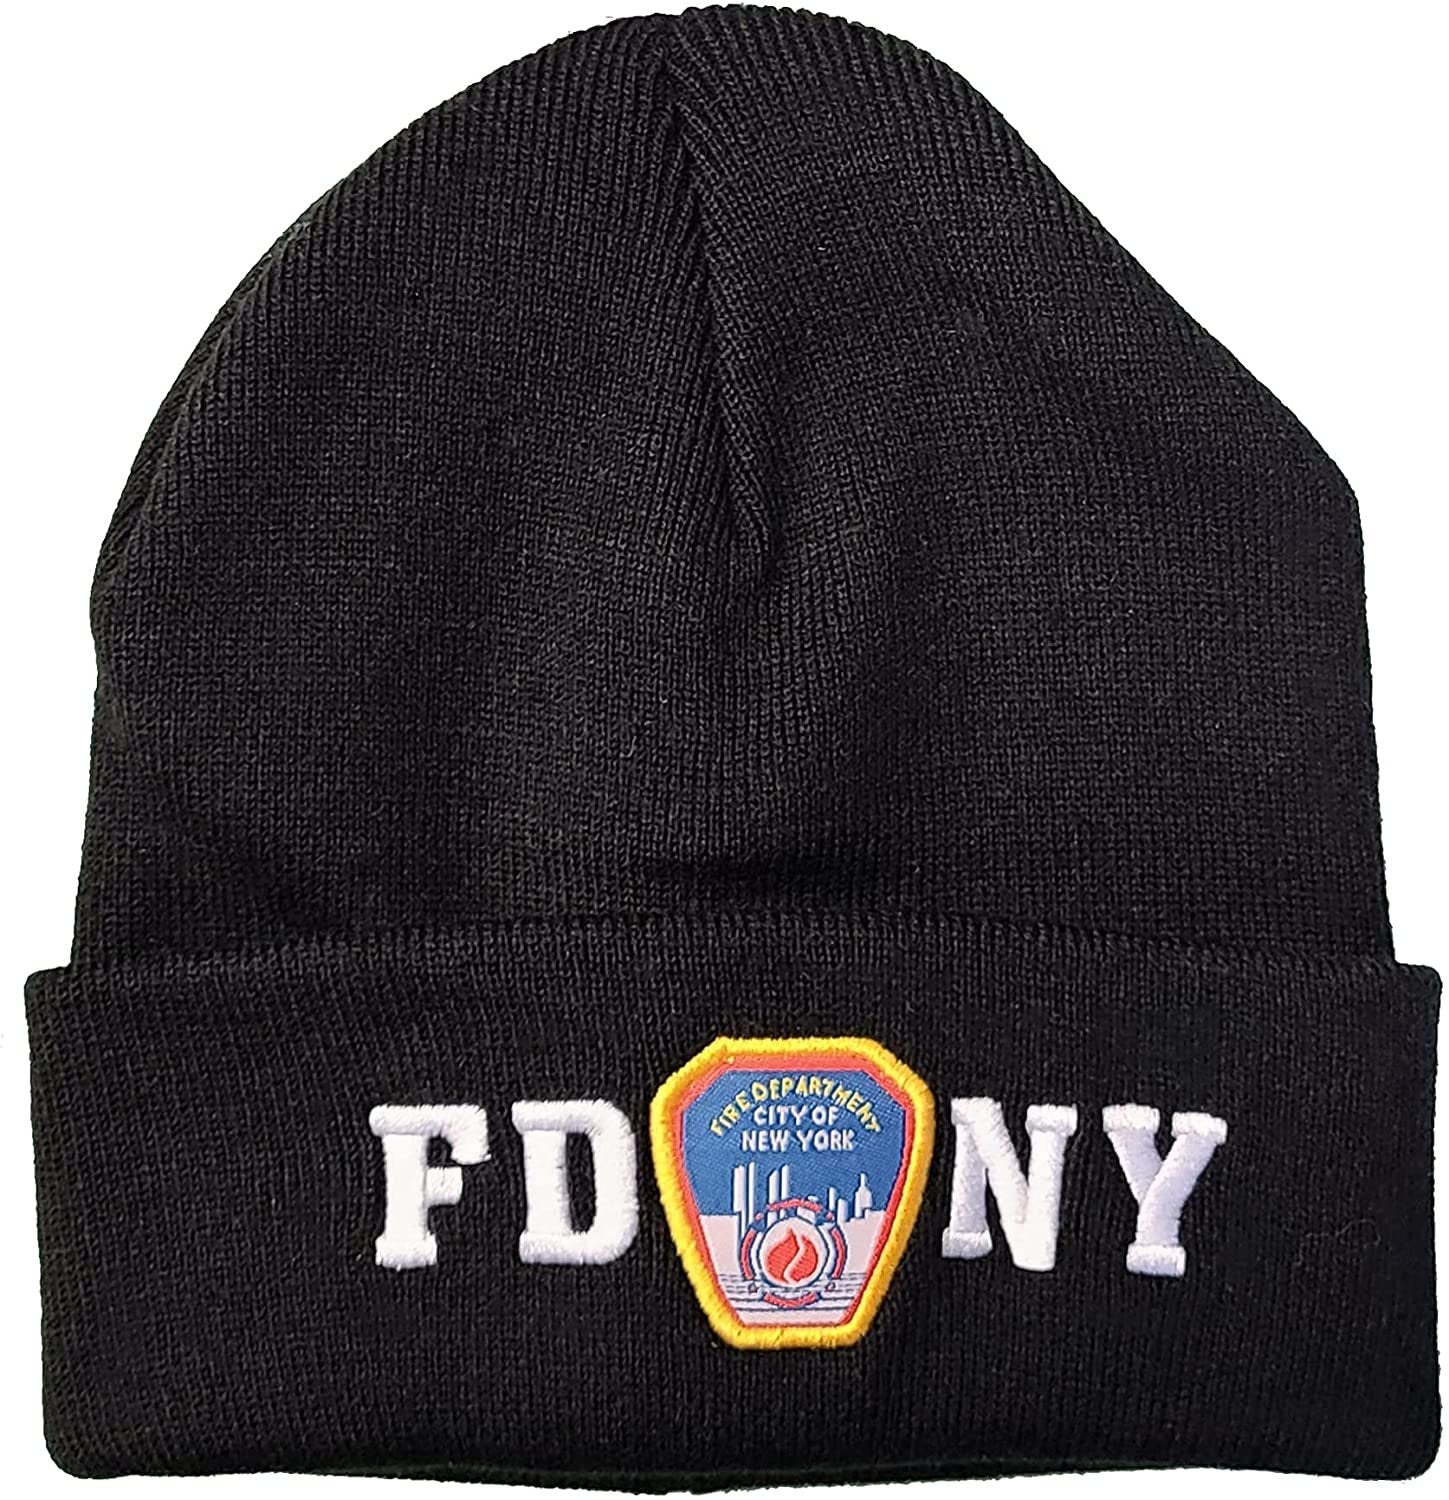 FDNY Beanies Officially Licensed Cold Weather Winter Hats